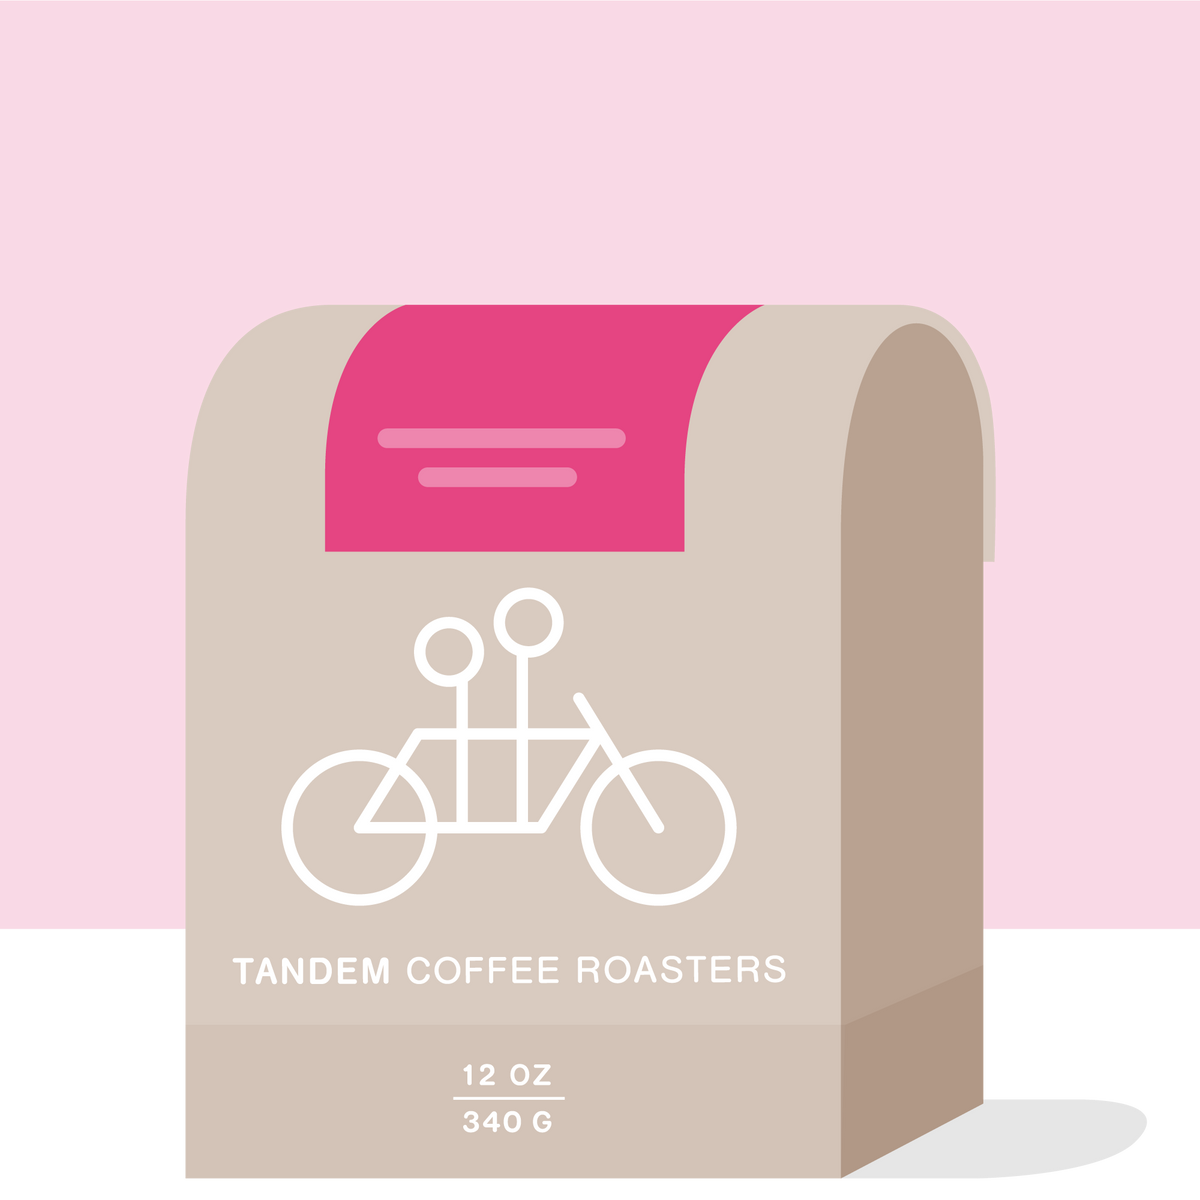 A tan coffee bag labeled "Tandem Coffee Roasters" featuring a drawing of a tandem bicycle on the front. The 12 oz (340 g) bag, filled with exceptional Kamwangi PB - Kenya from Kirinyaga Kenya, is set against a bright pink background.